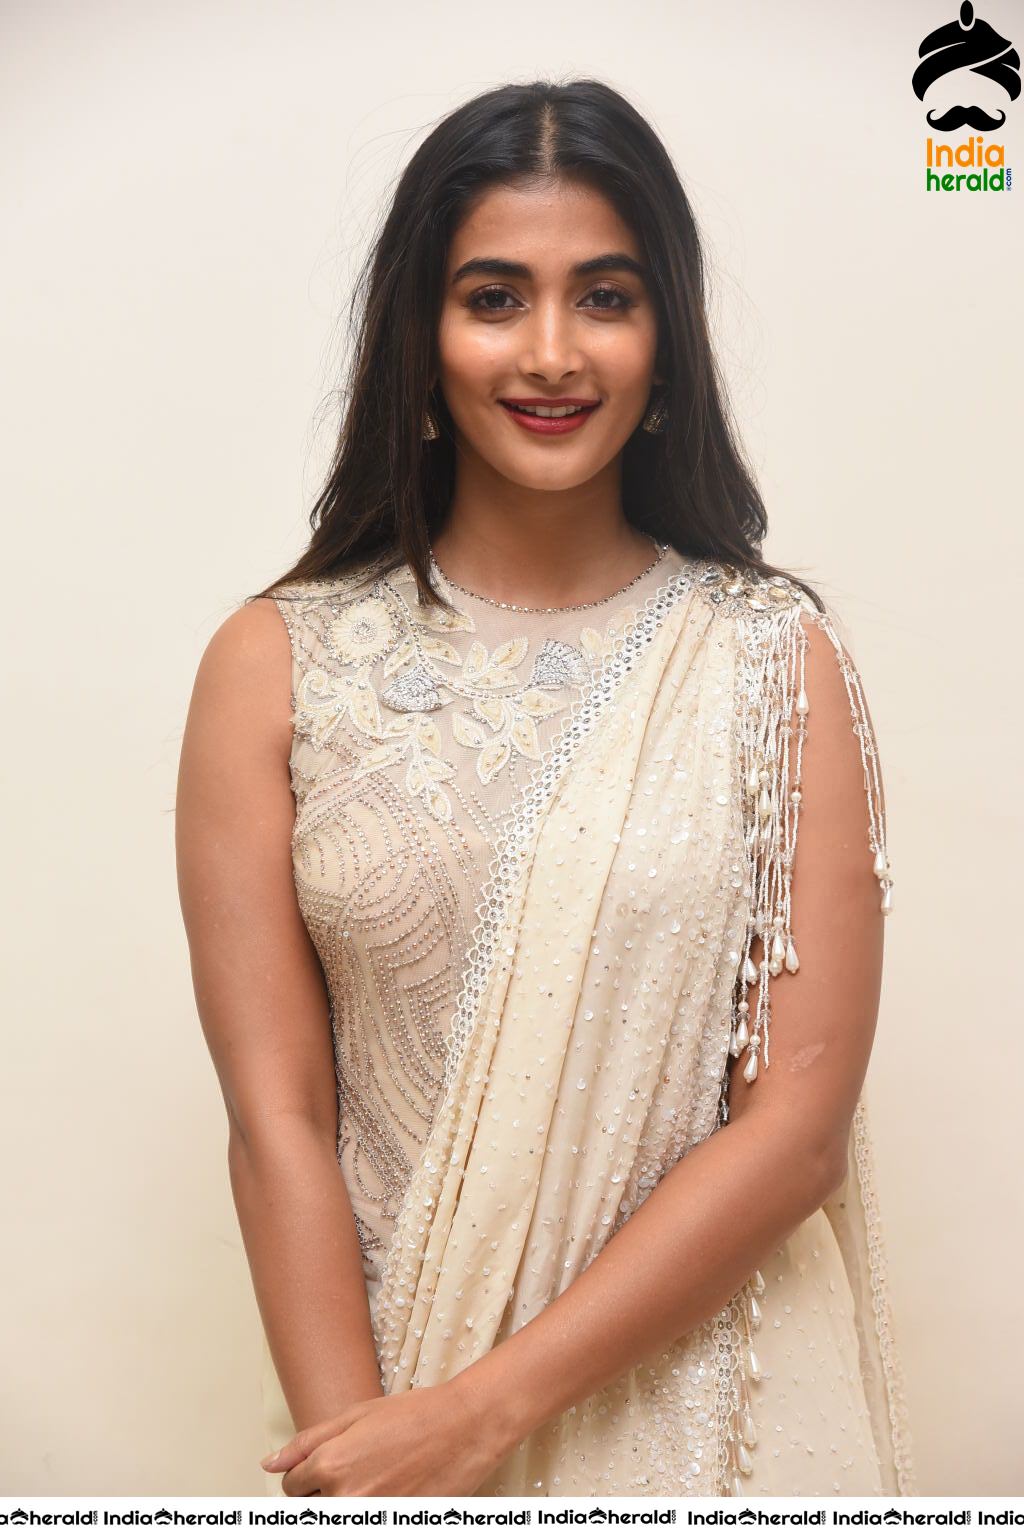 Pooja Hegde looking so desirable and teasing in these photos Set 2